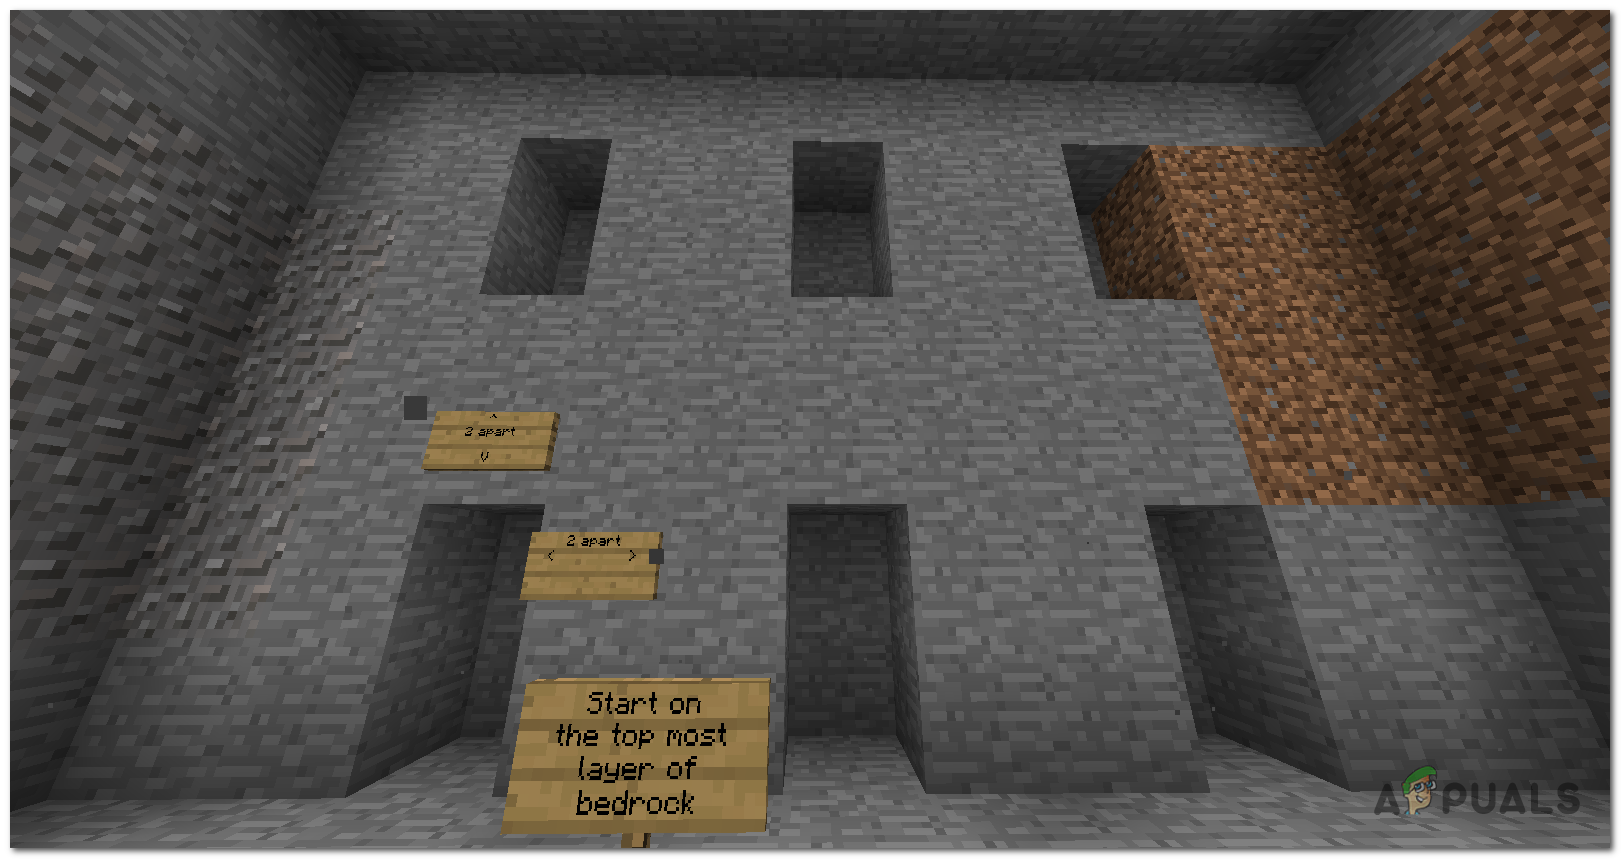 The Branch Mining Approach in Minecraft involves creating a series of interconnected tunnels to systematically search for valuable resources such as diamonds.